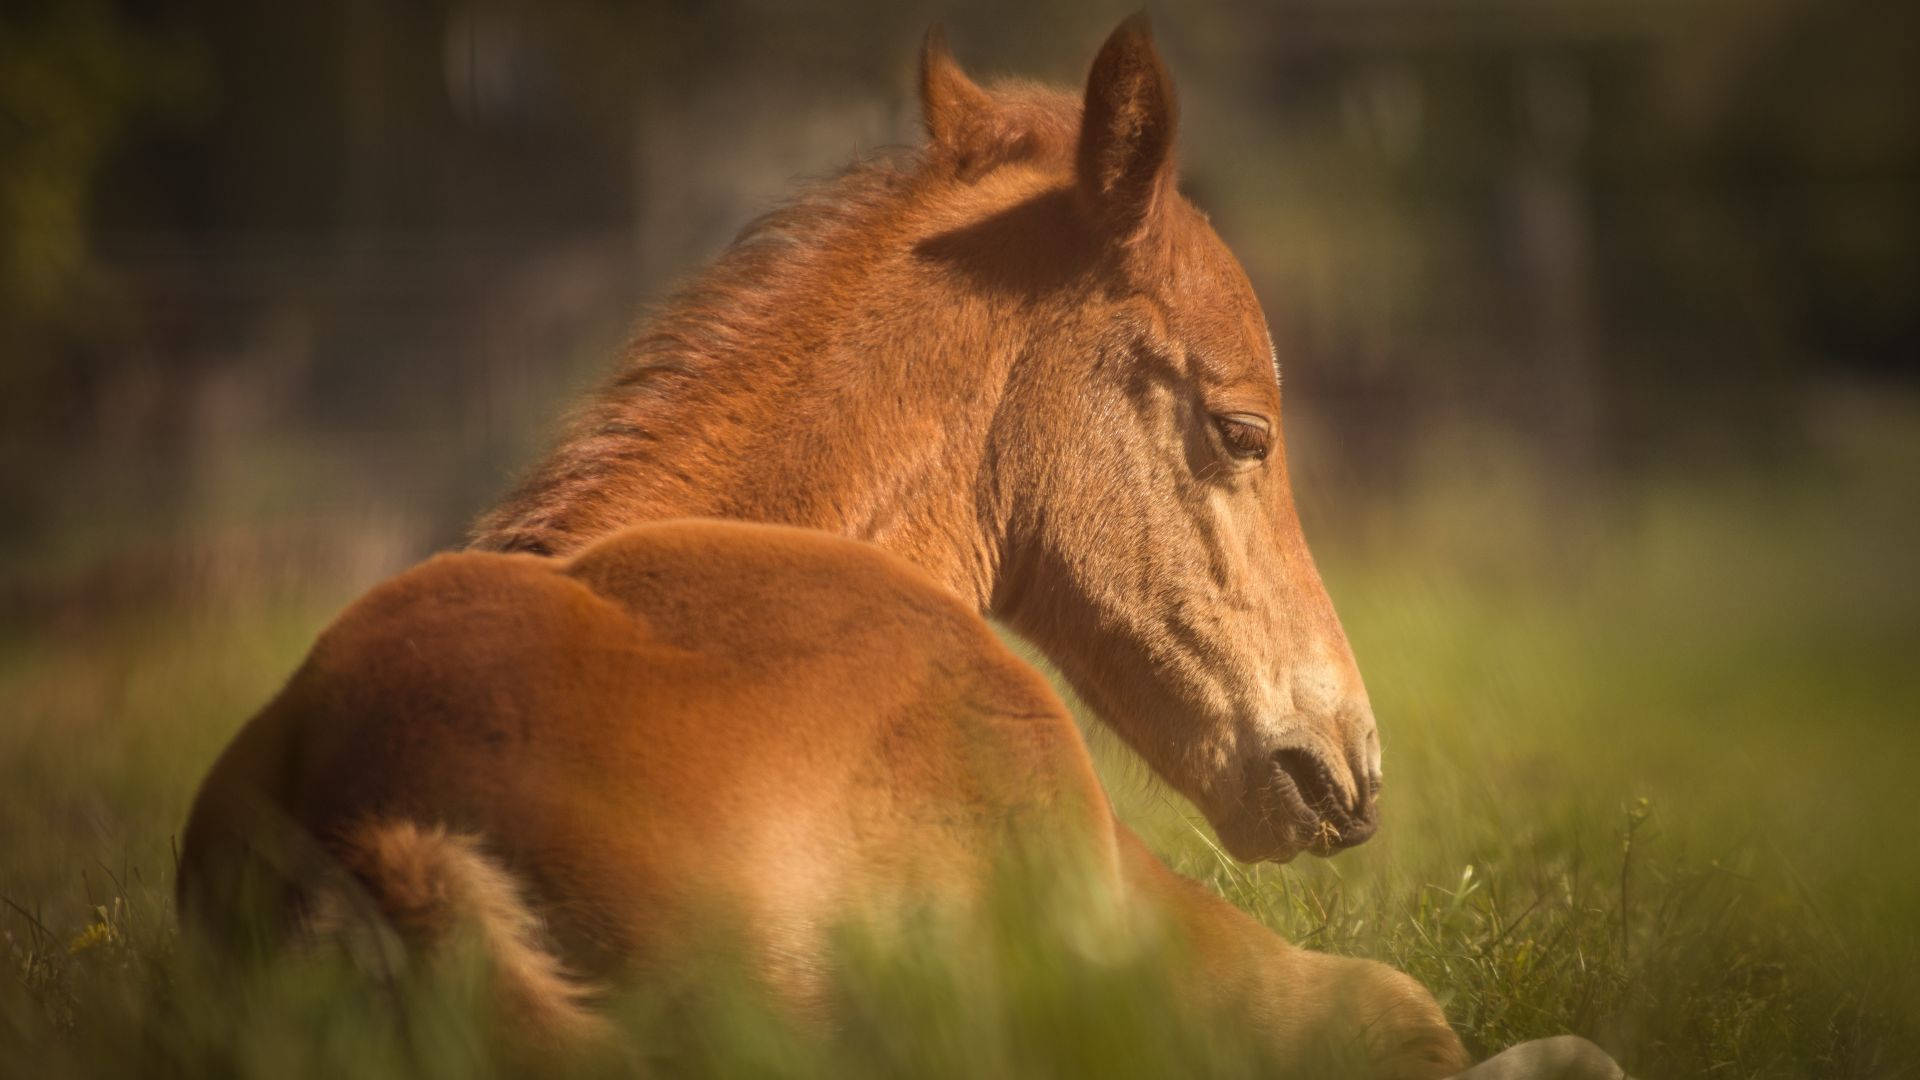 Brown Foal Back Angle With Vignette Effect Wallpaper